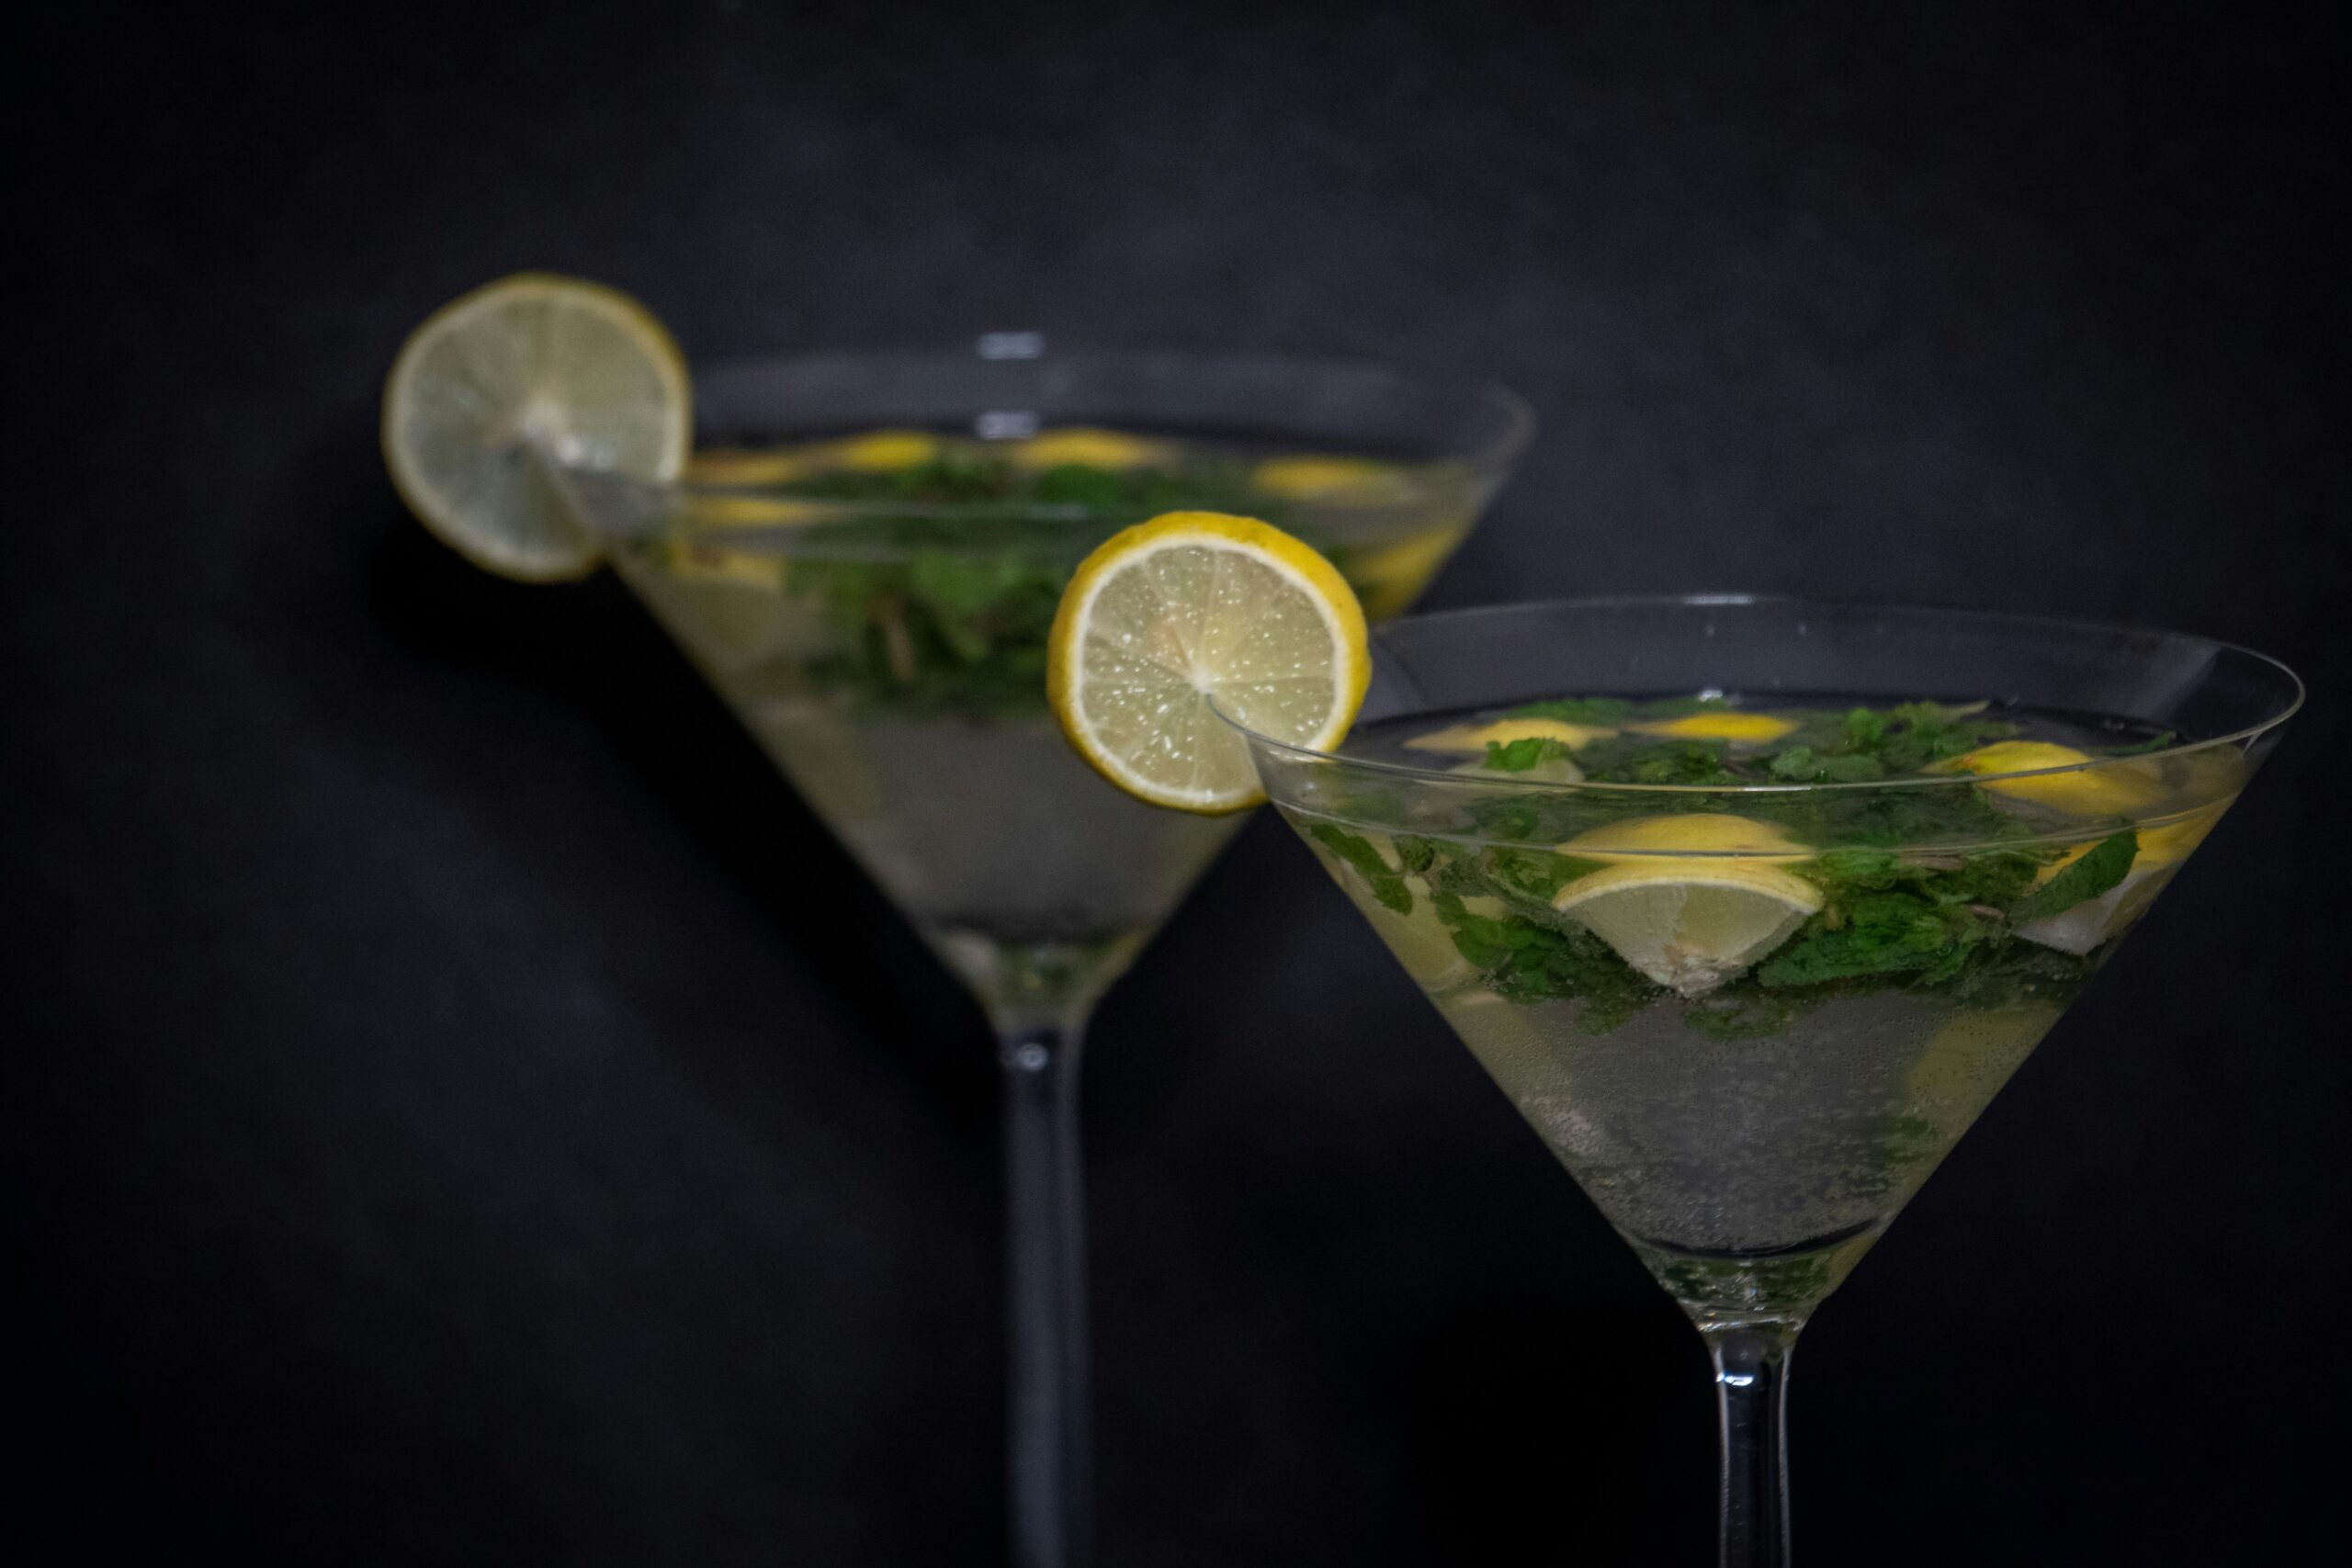 Try a lemon drop limoncello martini for a simple and citrus-flavored cocktail. Pictured: lemon drop martini